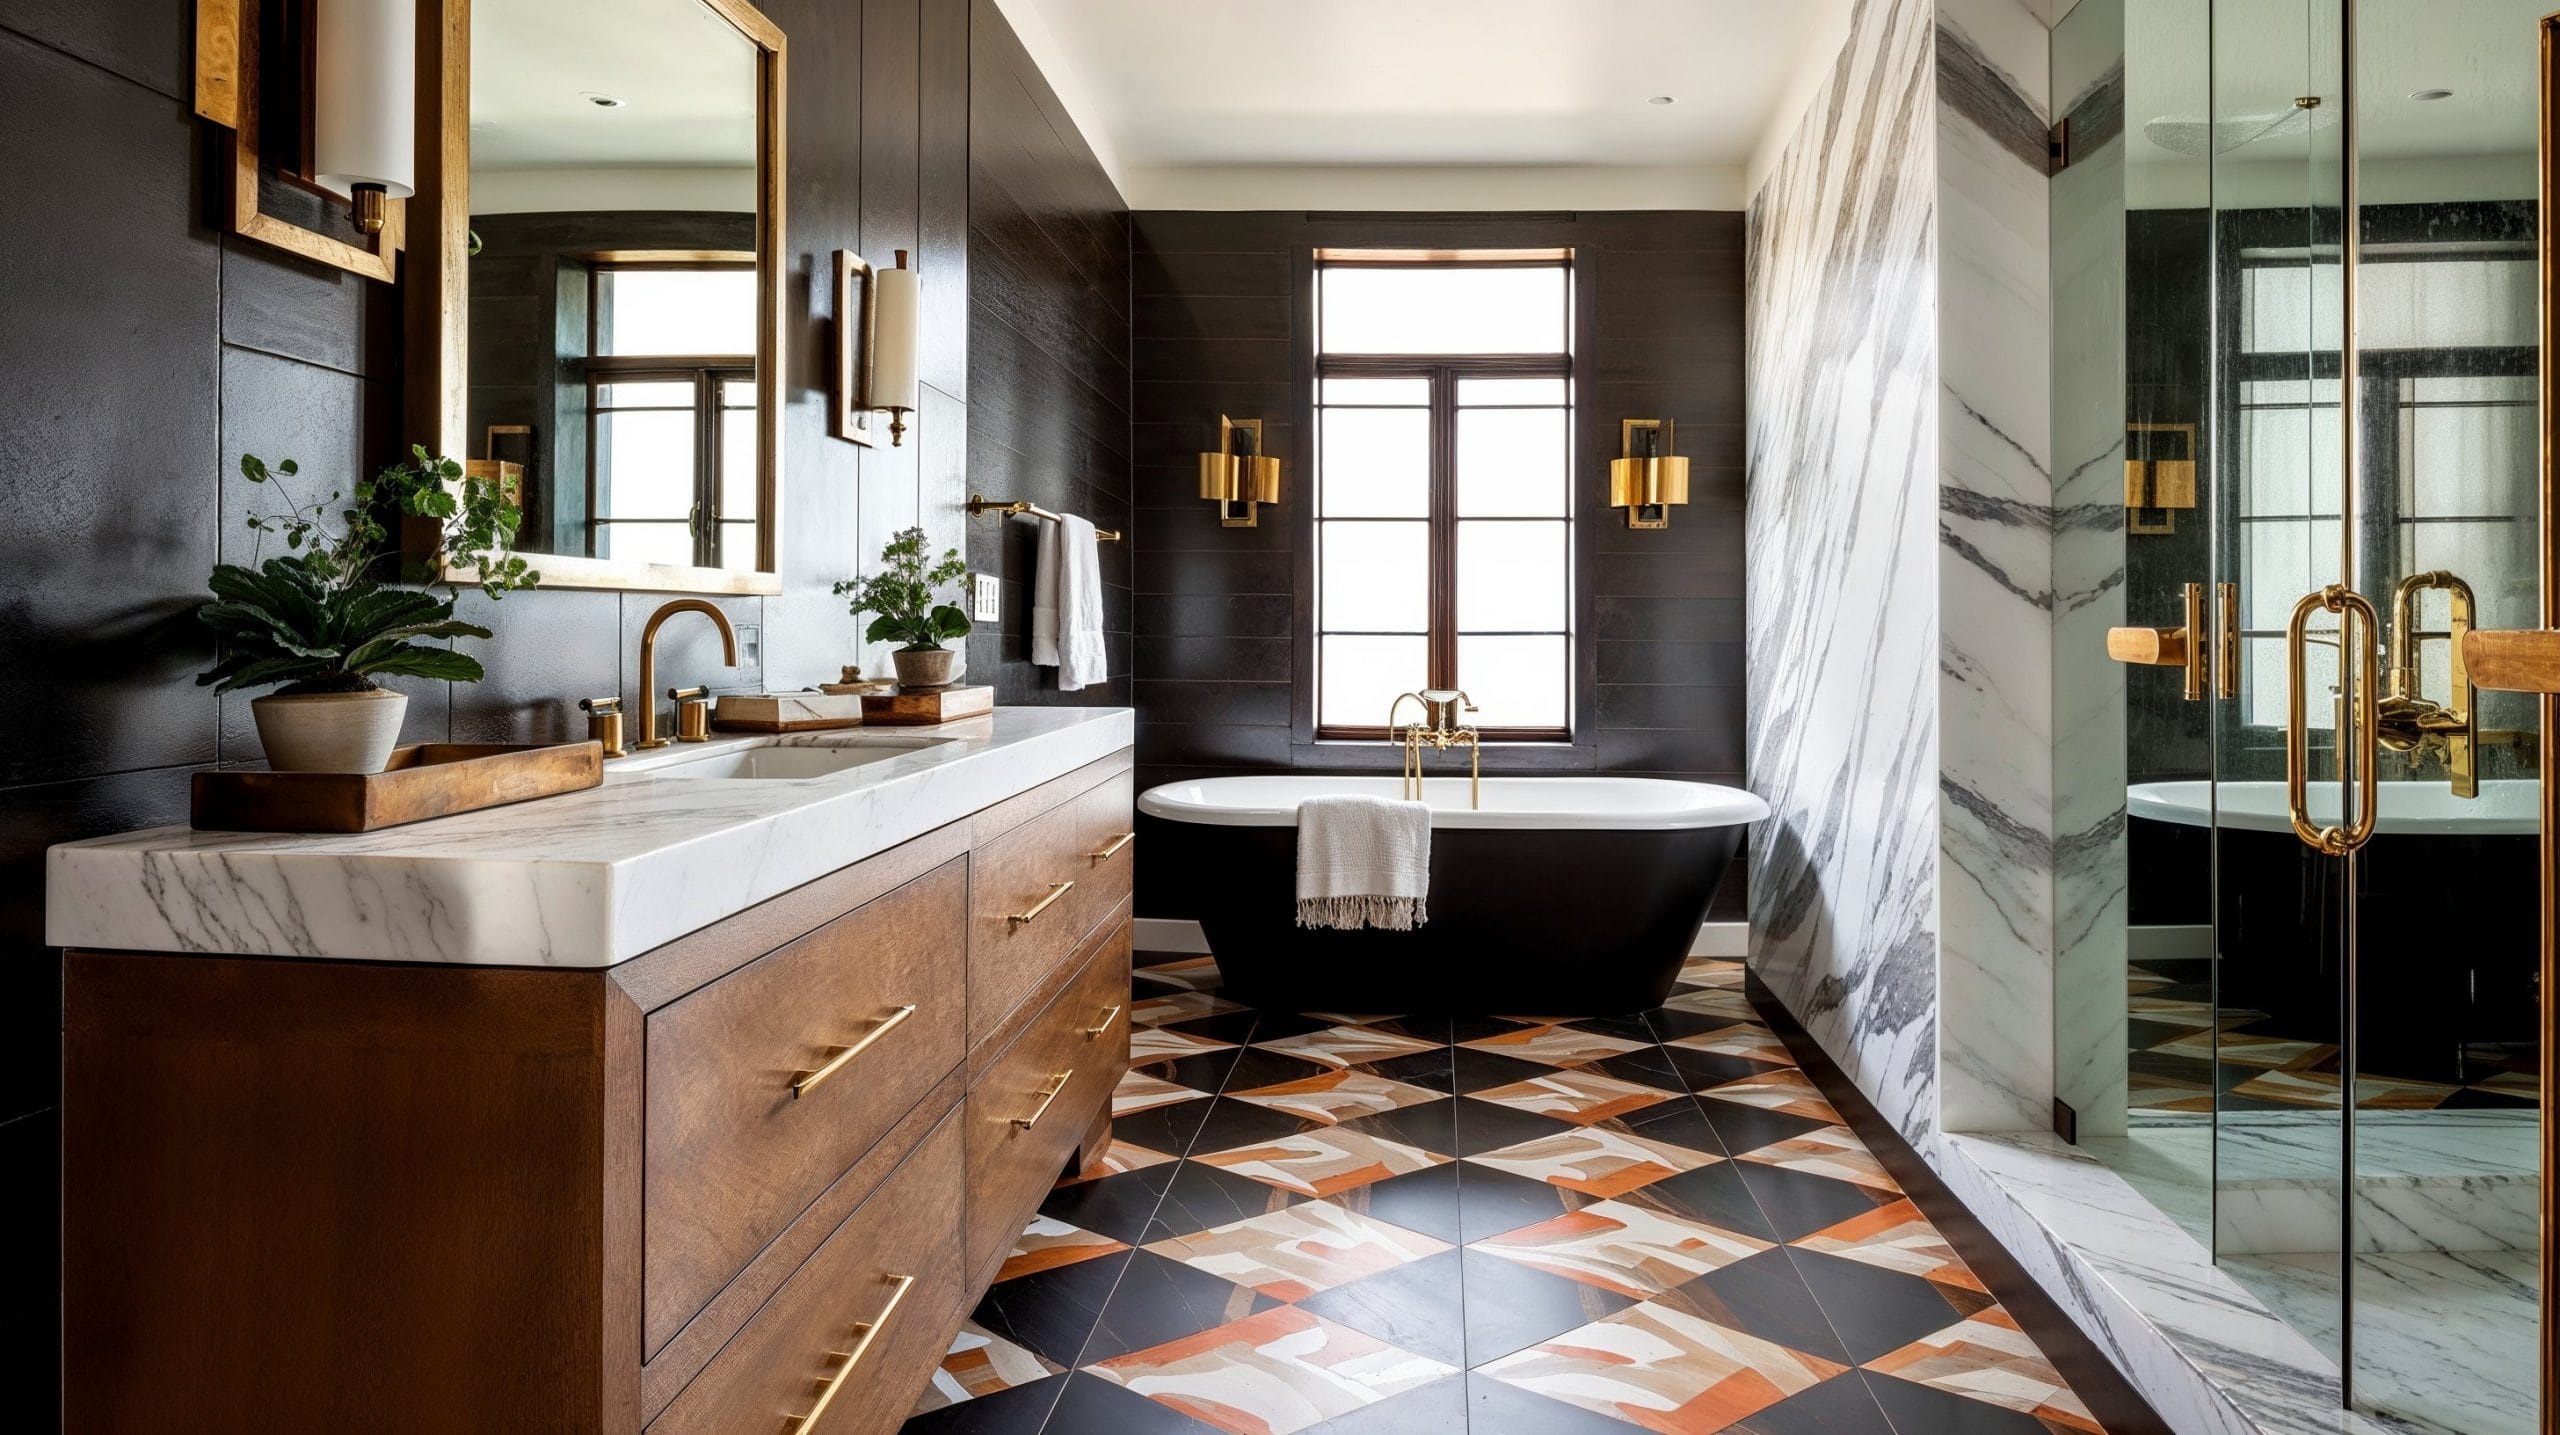 25 Best Bathroom Trends 2022 You’ll Want to Copy